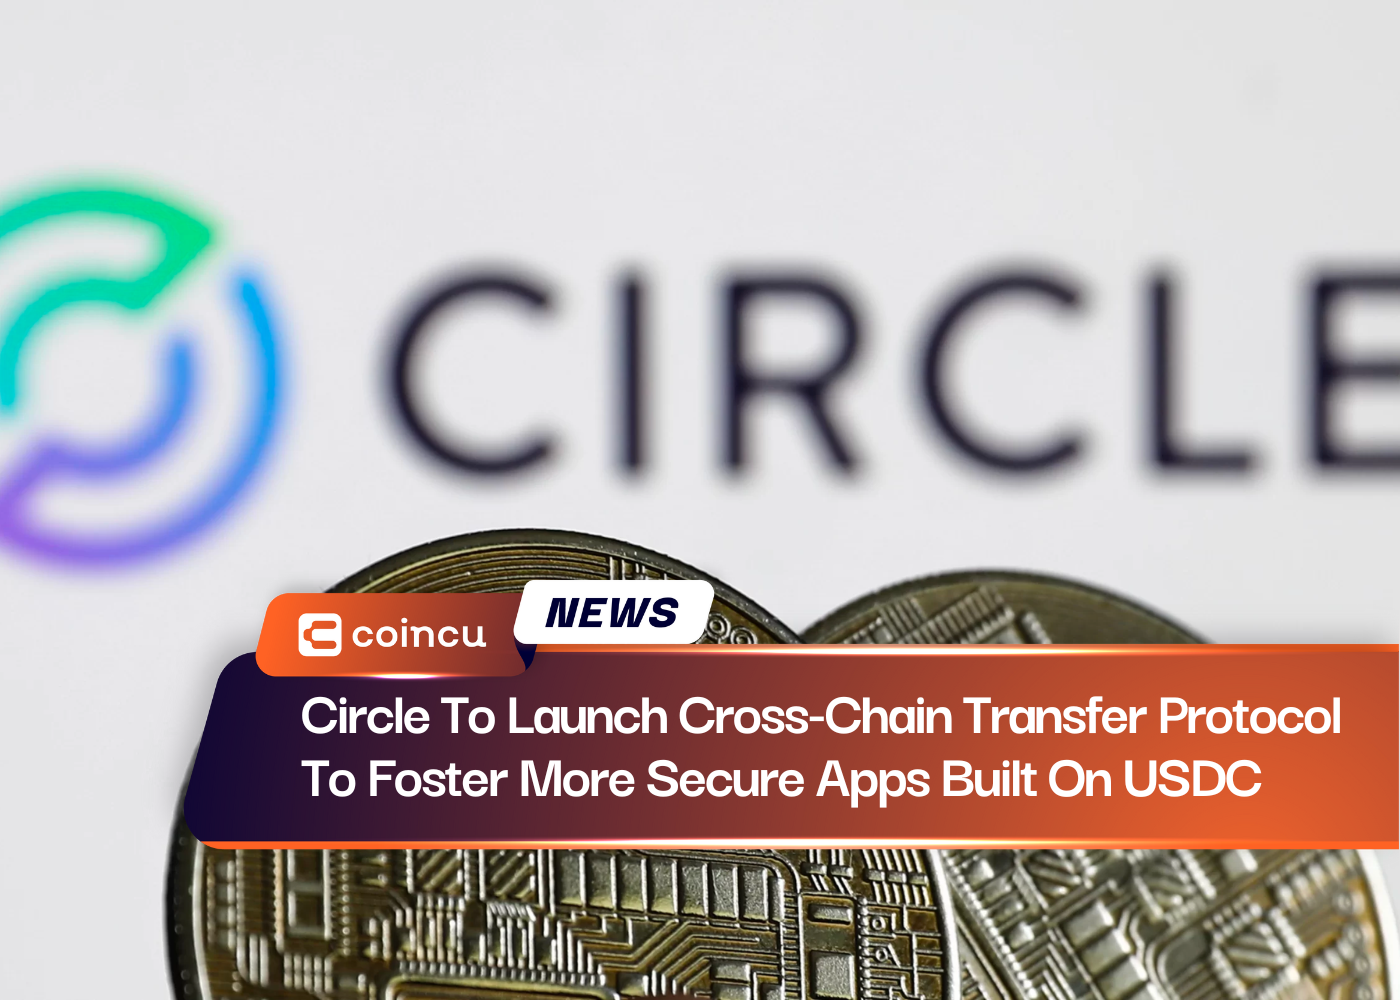 Circle To Launch Cross-Chain Transfer Protocol To Foster More Secure Apps Built On USDC